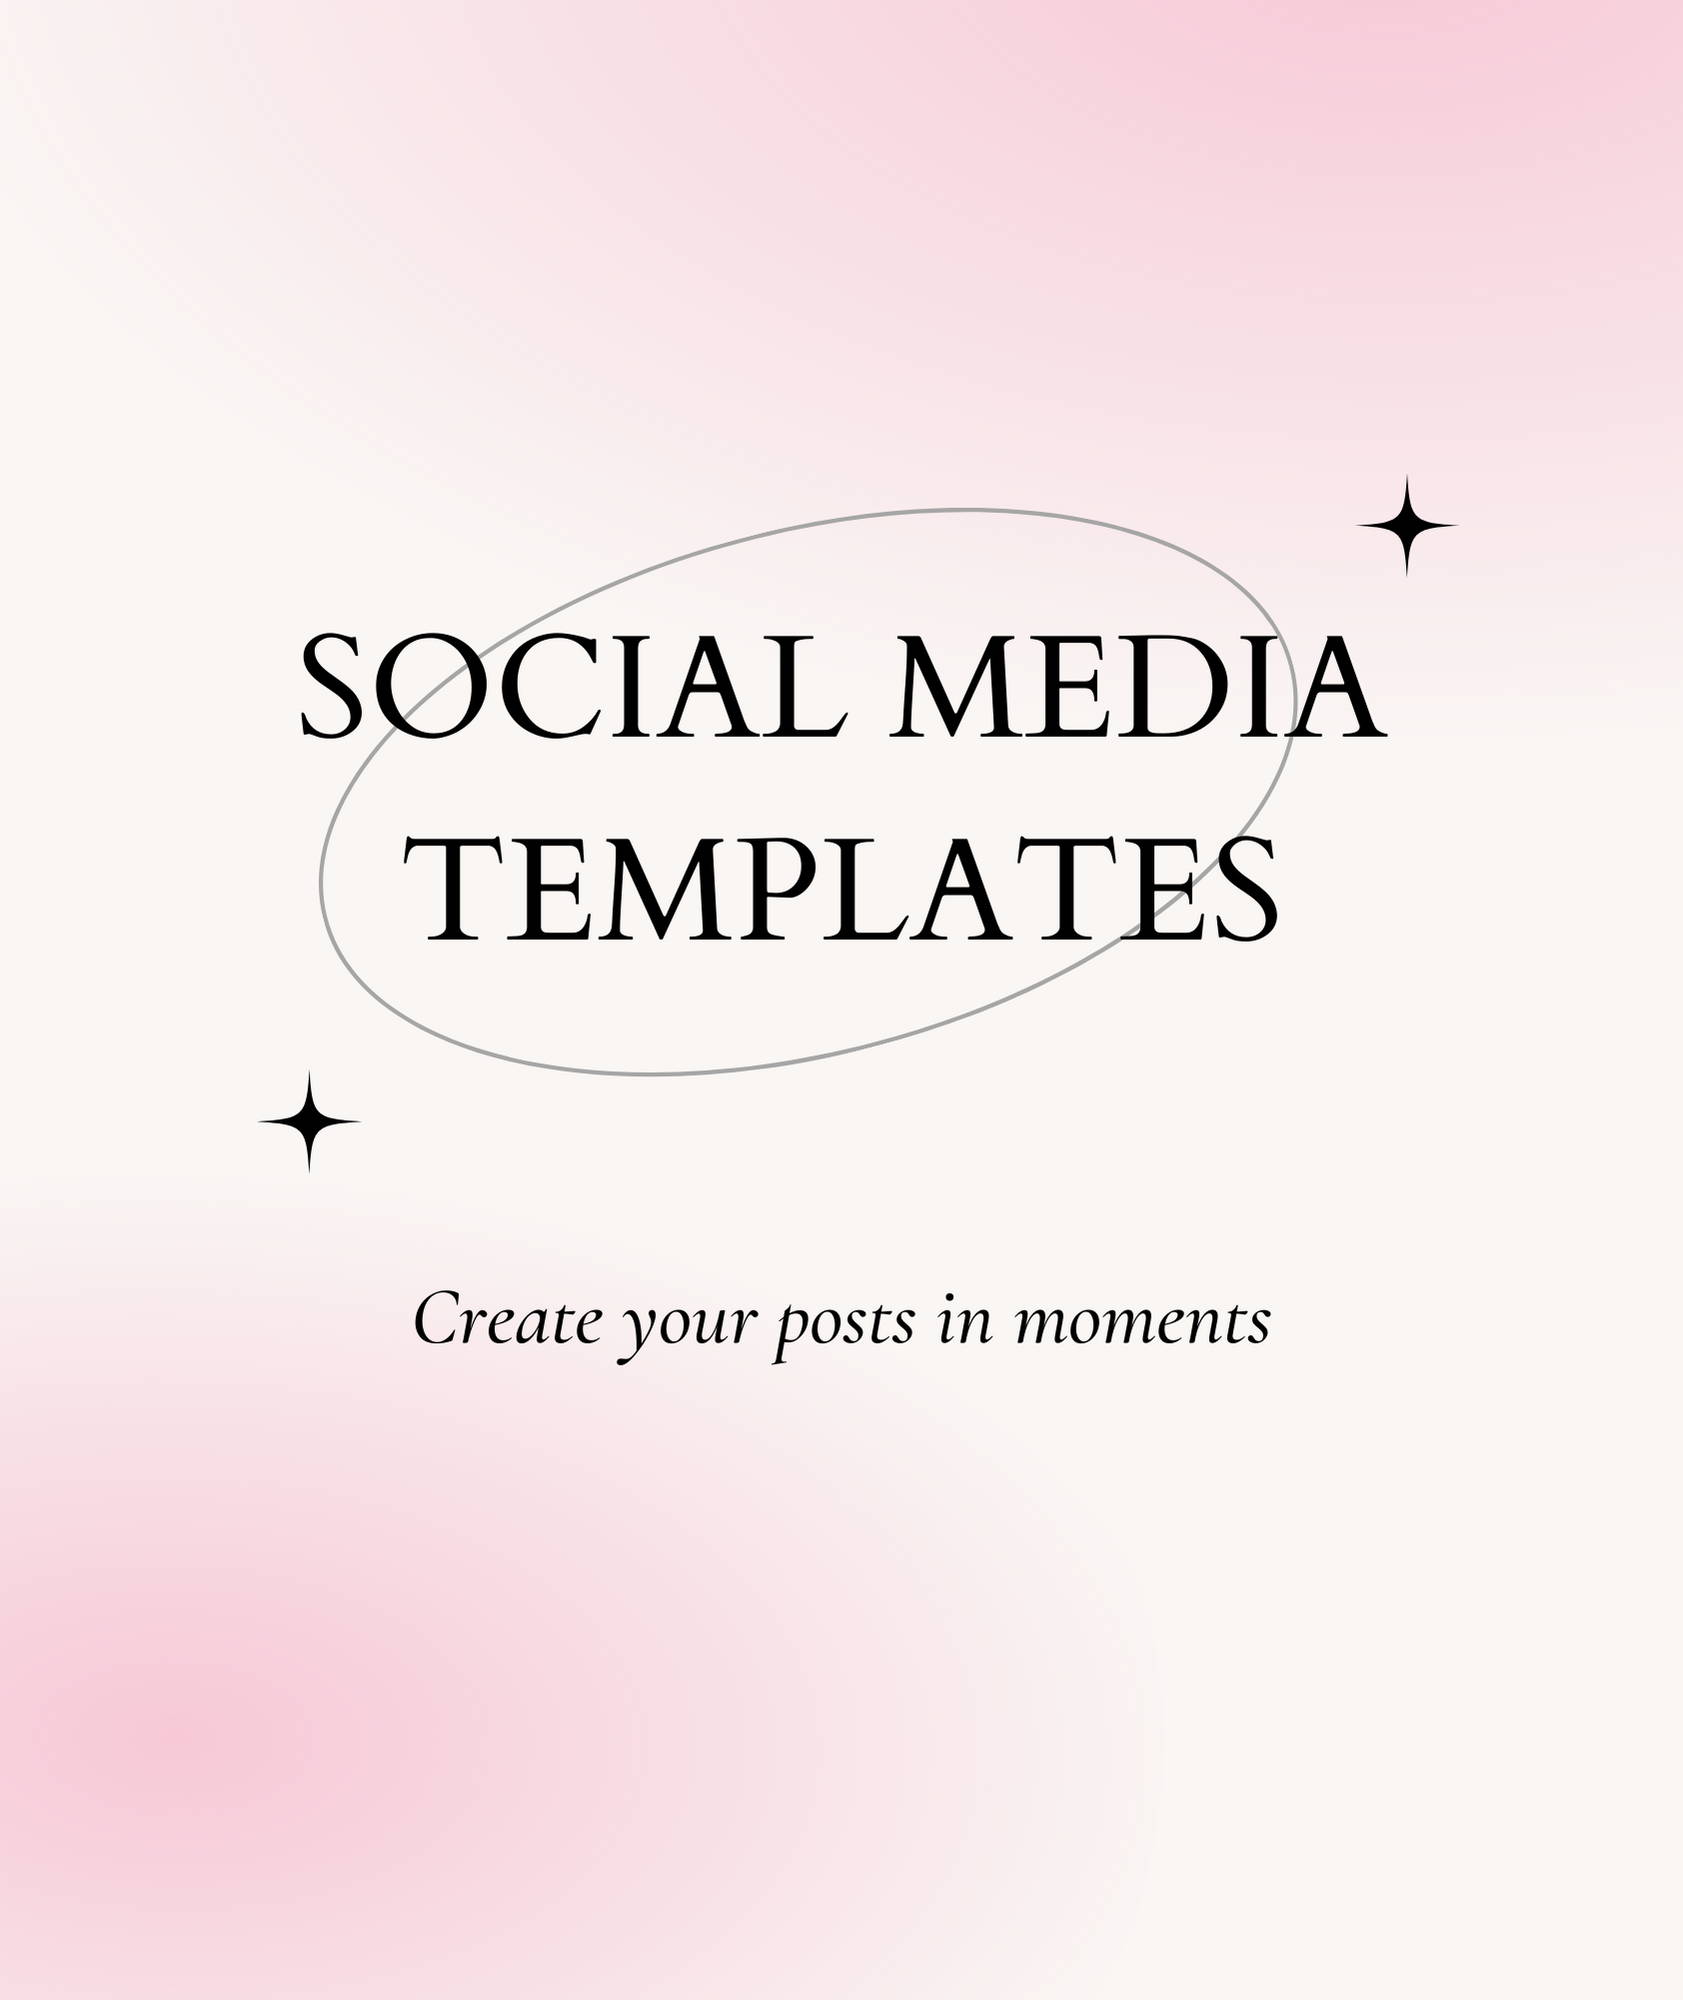 On our site you will find the best beauty templates on the world market, save time and money with our easily downloadable canva packages.